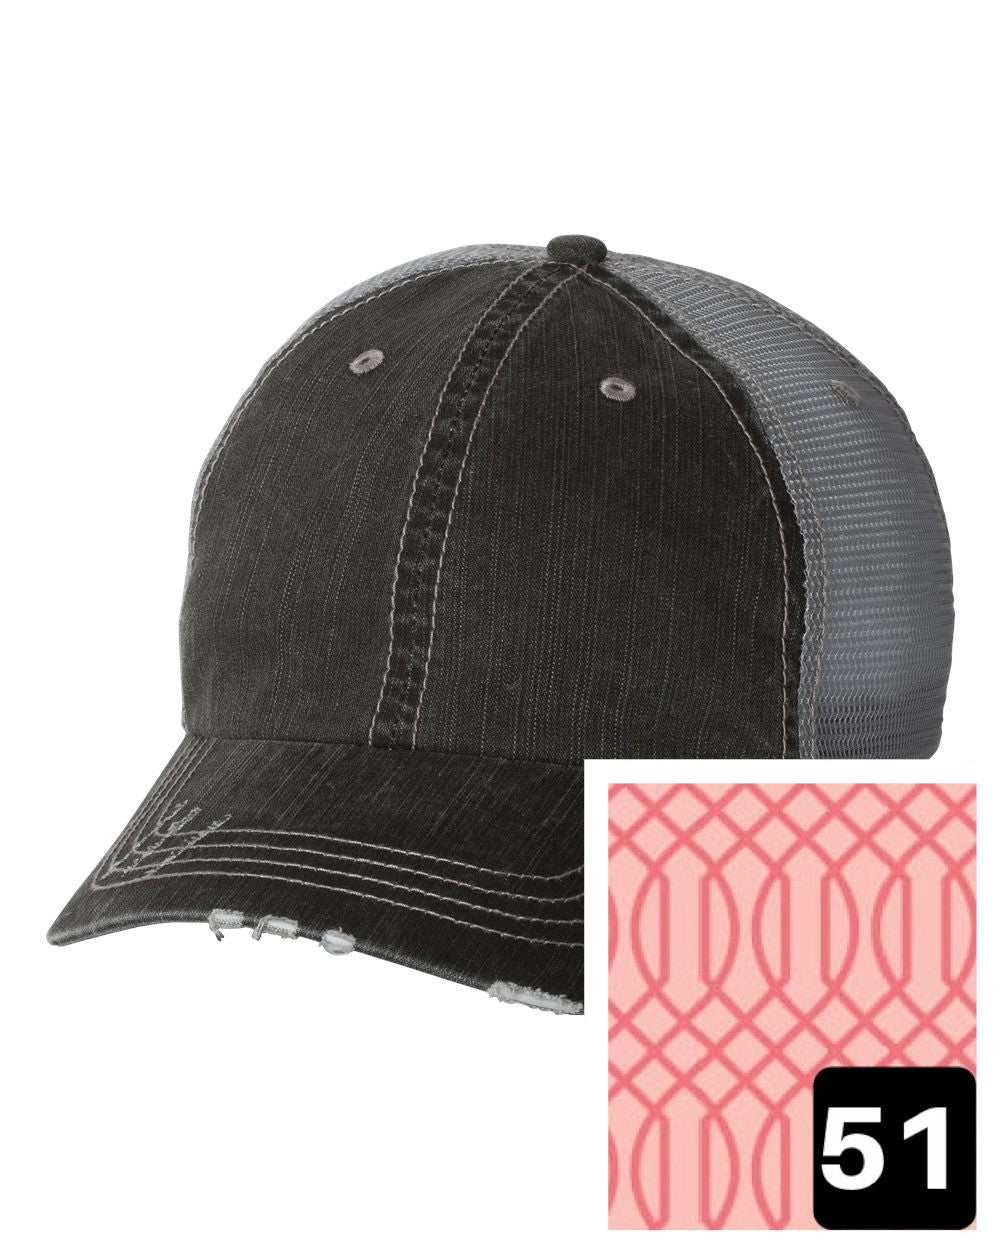 gray distressed trucker hat with white on gray hatch fabric state of Connecticut